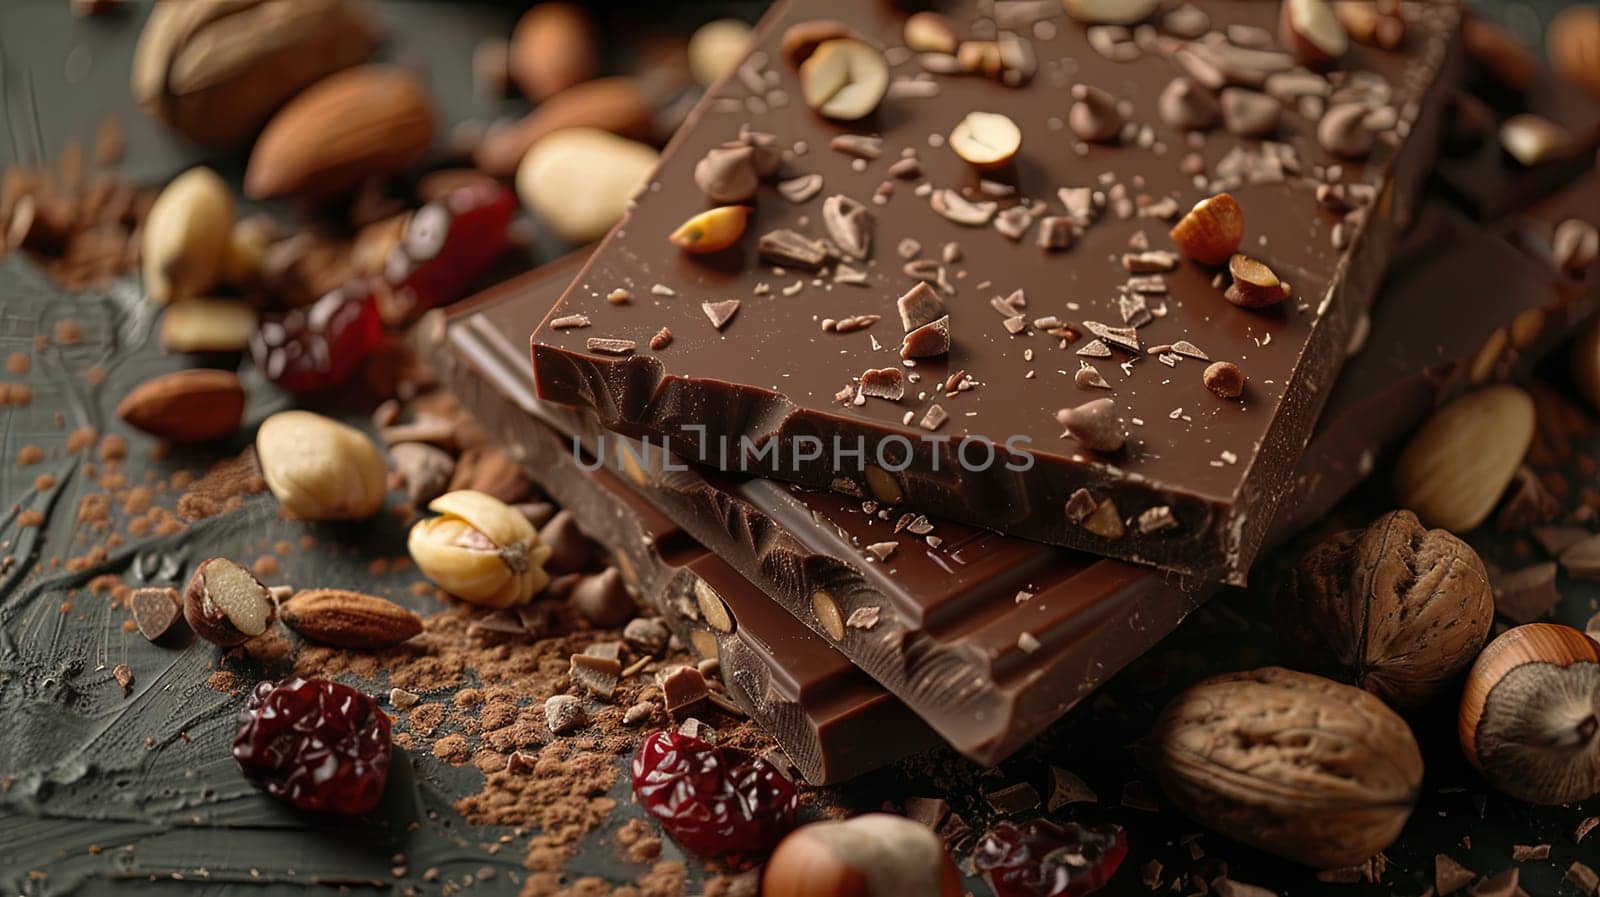 A detailed close-up of a chocolate bar surrounded by an assortment of nuts, showcasing rich textures and natural ingredients.